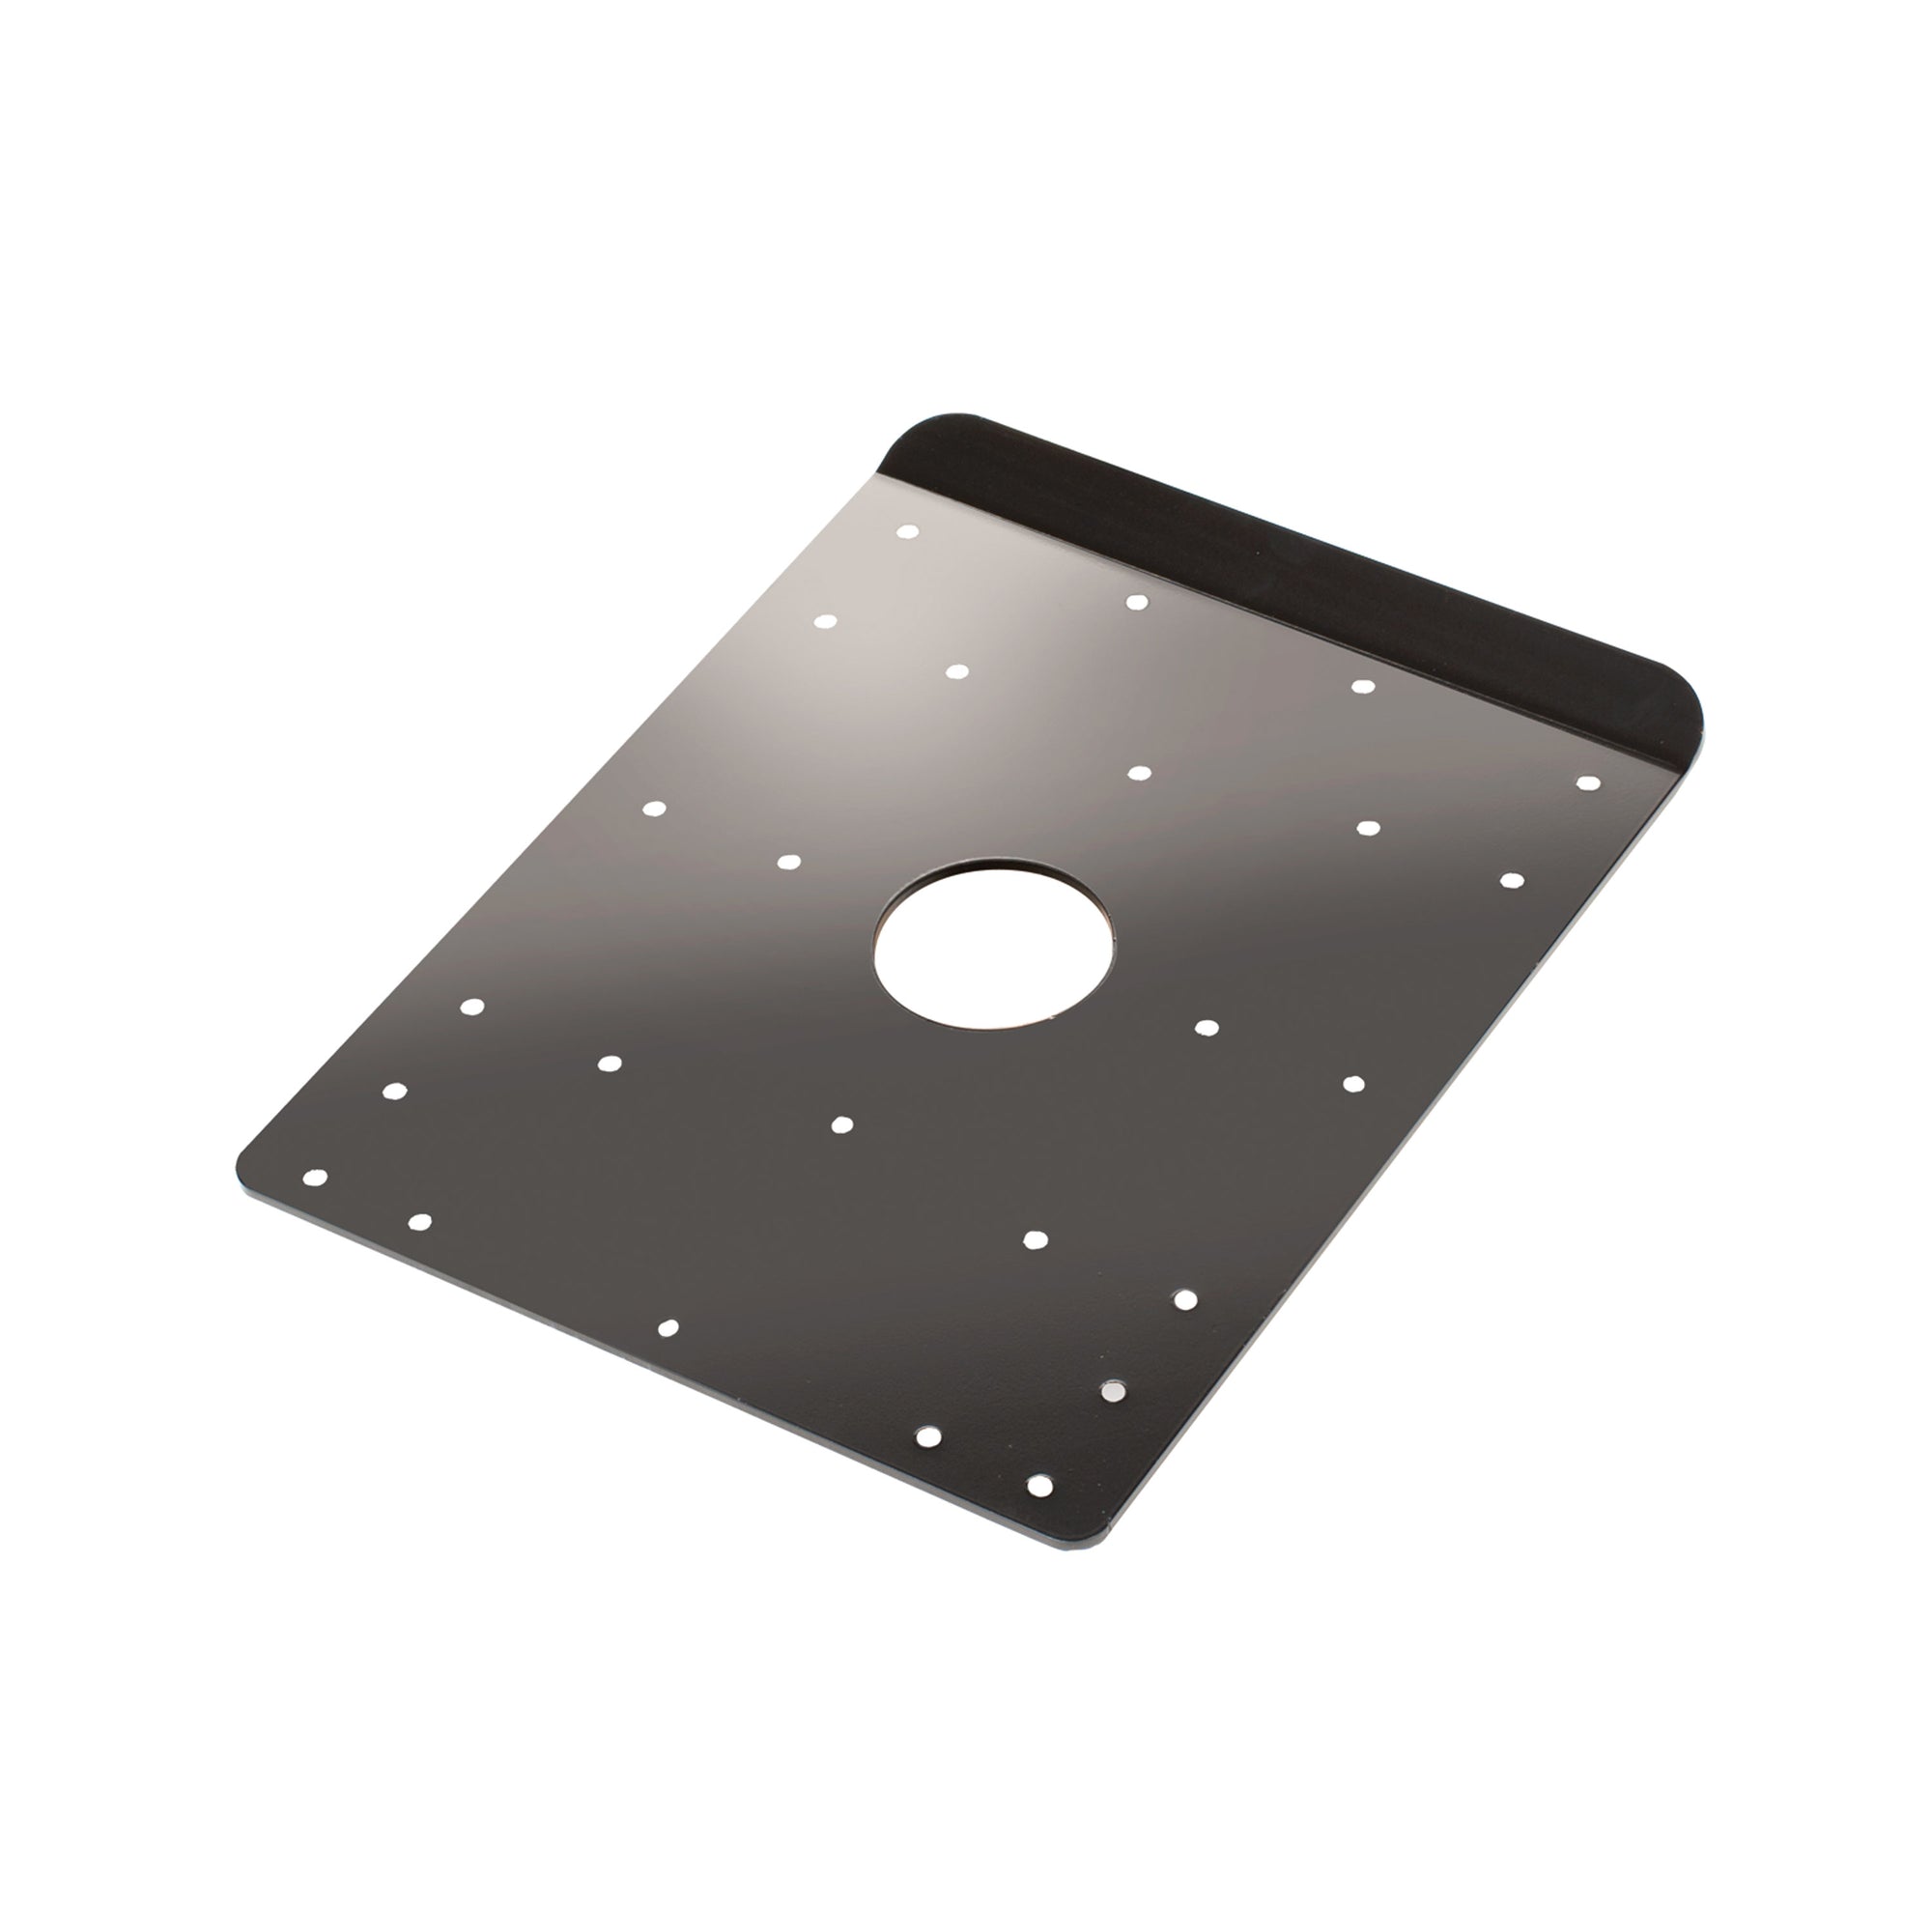 PullRite 3317 Universal Capture Plate for SuperGlide Hitches